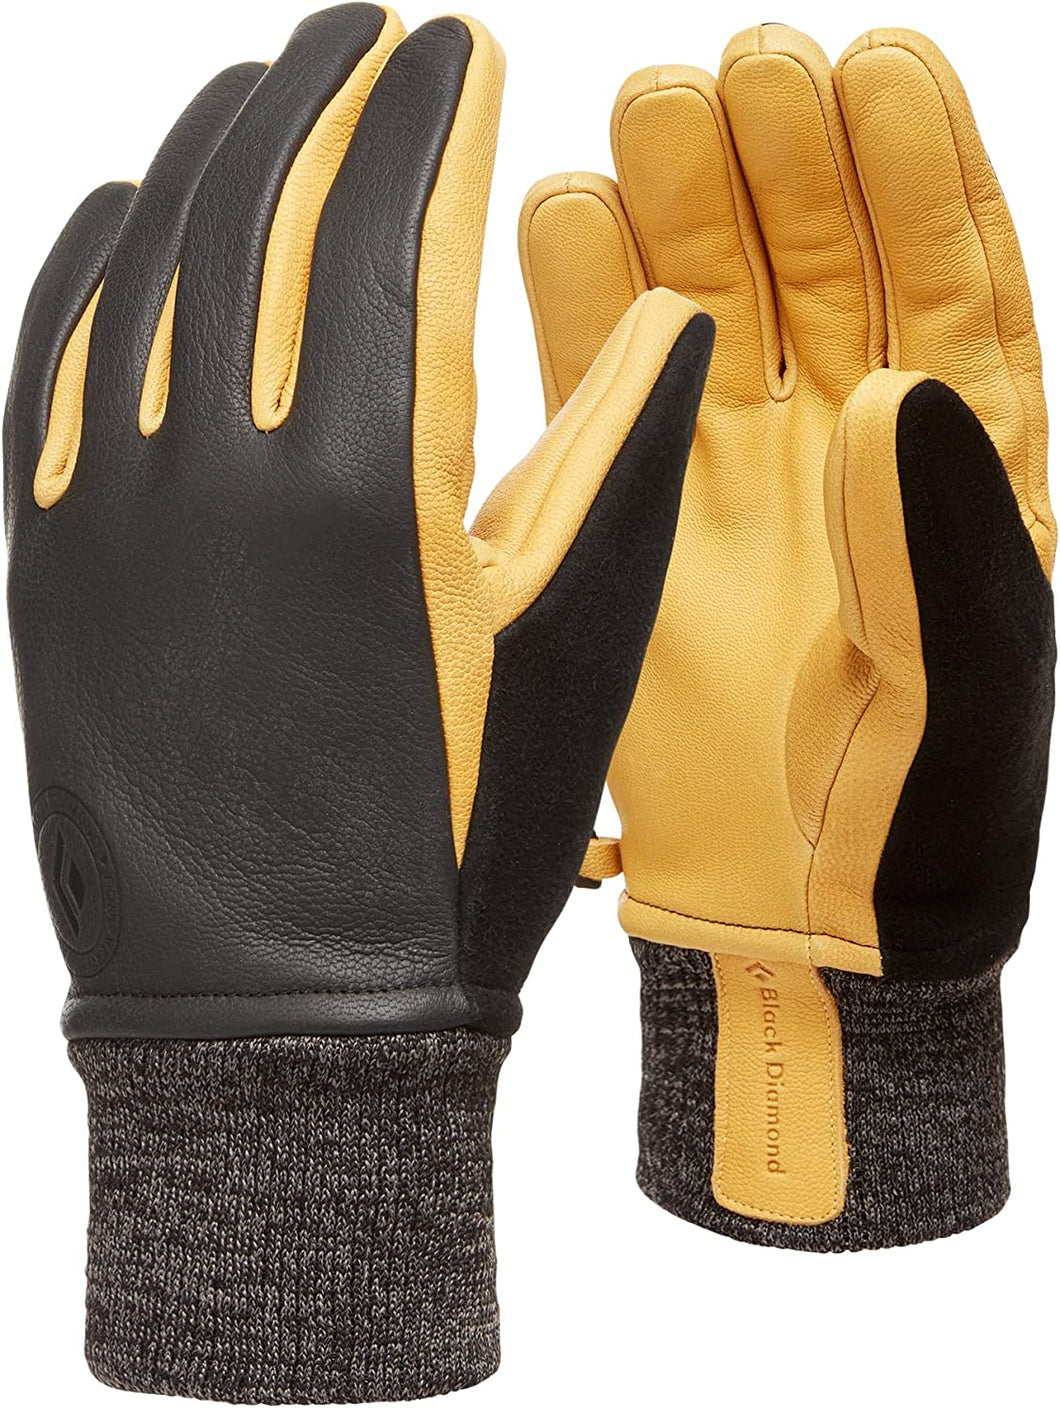 Black & Yellow Goat Leather Shell Winter Gloves